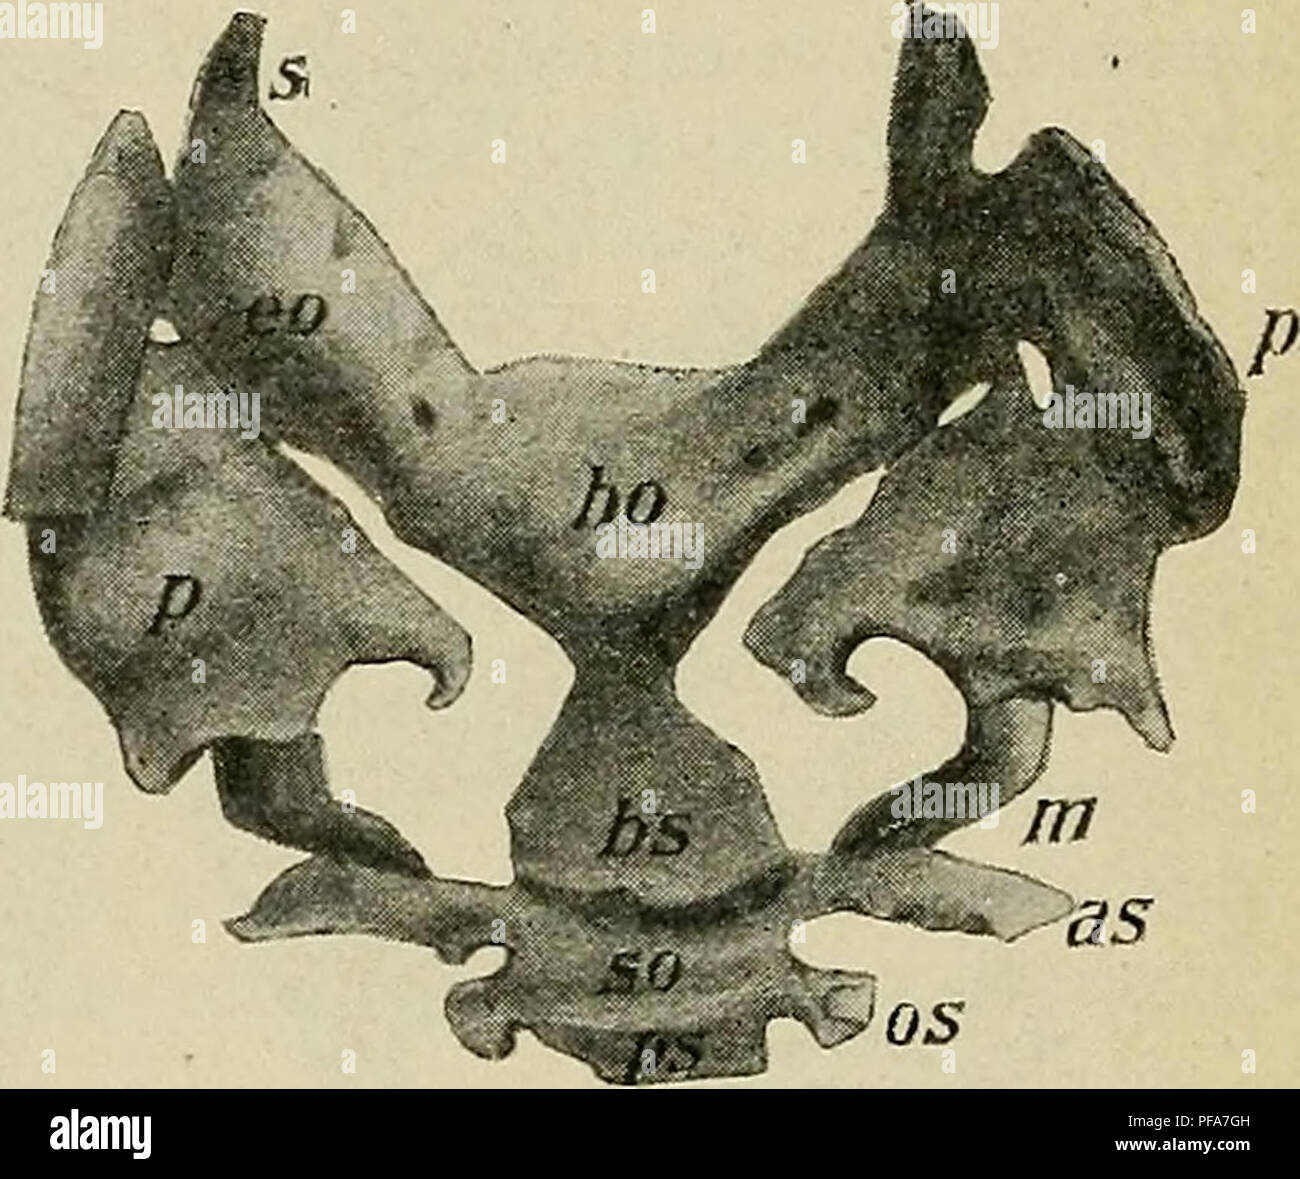 . The development of the human body : a manual of human embryology. Embryology; Embryo, Non-Mammalian. Fig. i 02.—Sternum of New-born Child, showing Centers of Ossification. I to VII, Costal cartilages.— (Gegenbaur.) Fig. 103.—Reconstruction of the Chondro- cranium of an embryo of 14 mm. as, Alisphenoid; bo, basioccipital; bs, basi- sphenoid; eo, exoccipital; m, Meckel's cartilage; os, orbitosphenoid; p, periotic; ps, presphenoid; so, sella turcica; s, supraoccipital.—{Levi.) The suprasternal bones are the rudiments of a bone or cartilage, the omosternum, situated in front of the manubrium in  Stock Photo